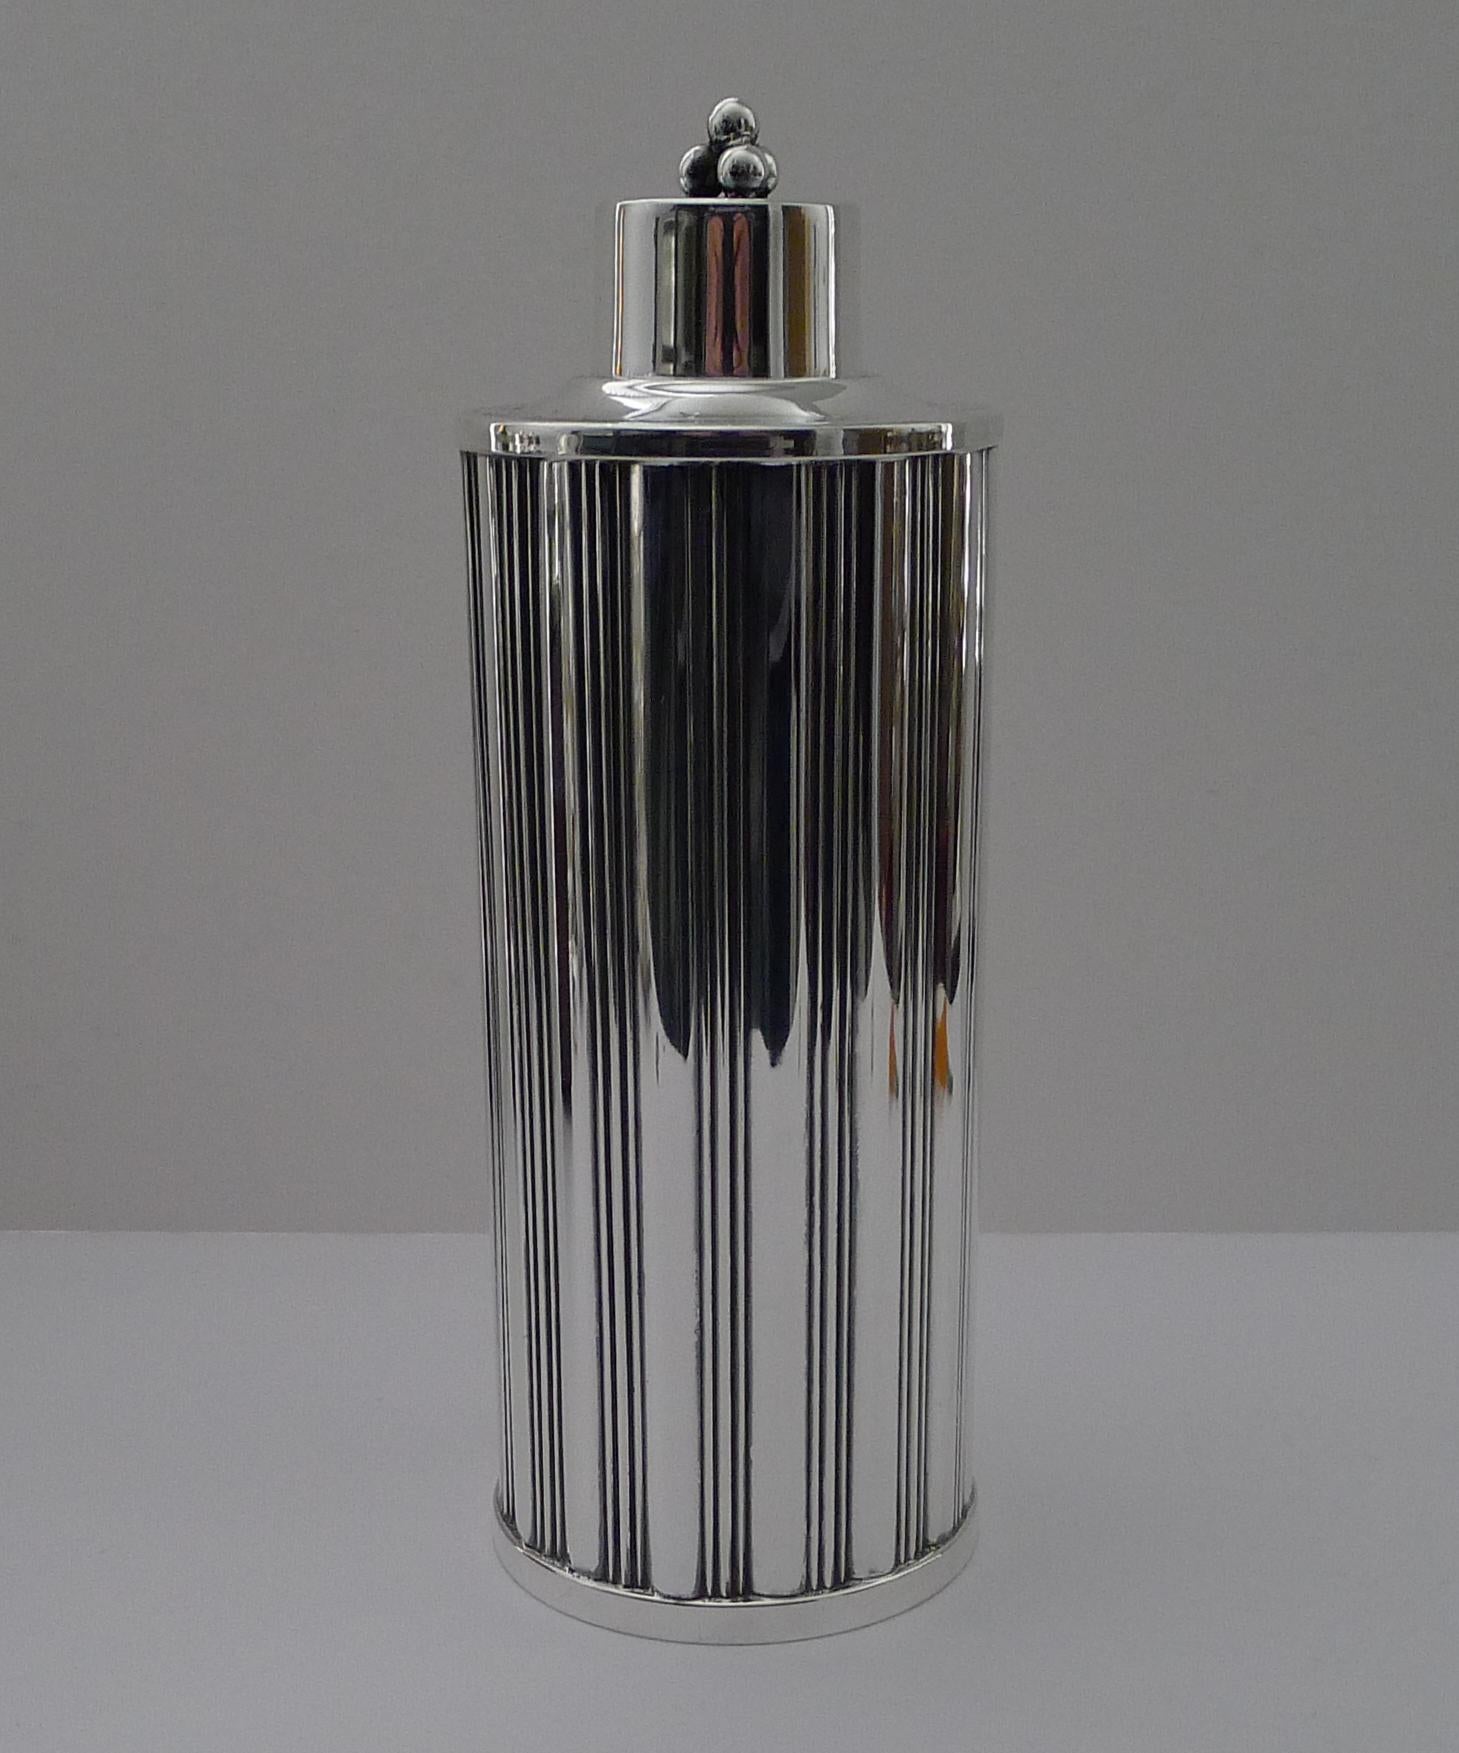 A magnificent and rare silver plated cocktail shaker by Tage Göthlin for Tesi, Gothenburg, Sweden c.1940.

Just back from our silversmith's workshop where it has been professionally cleaned and polished, restoring it to it's former glory.

Beautiful